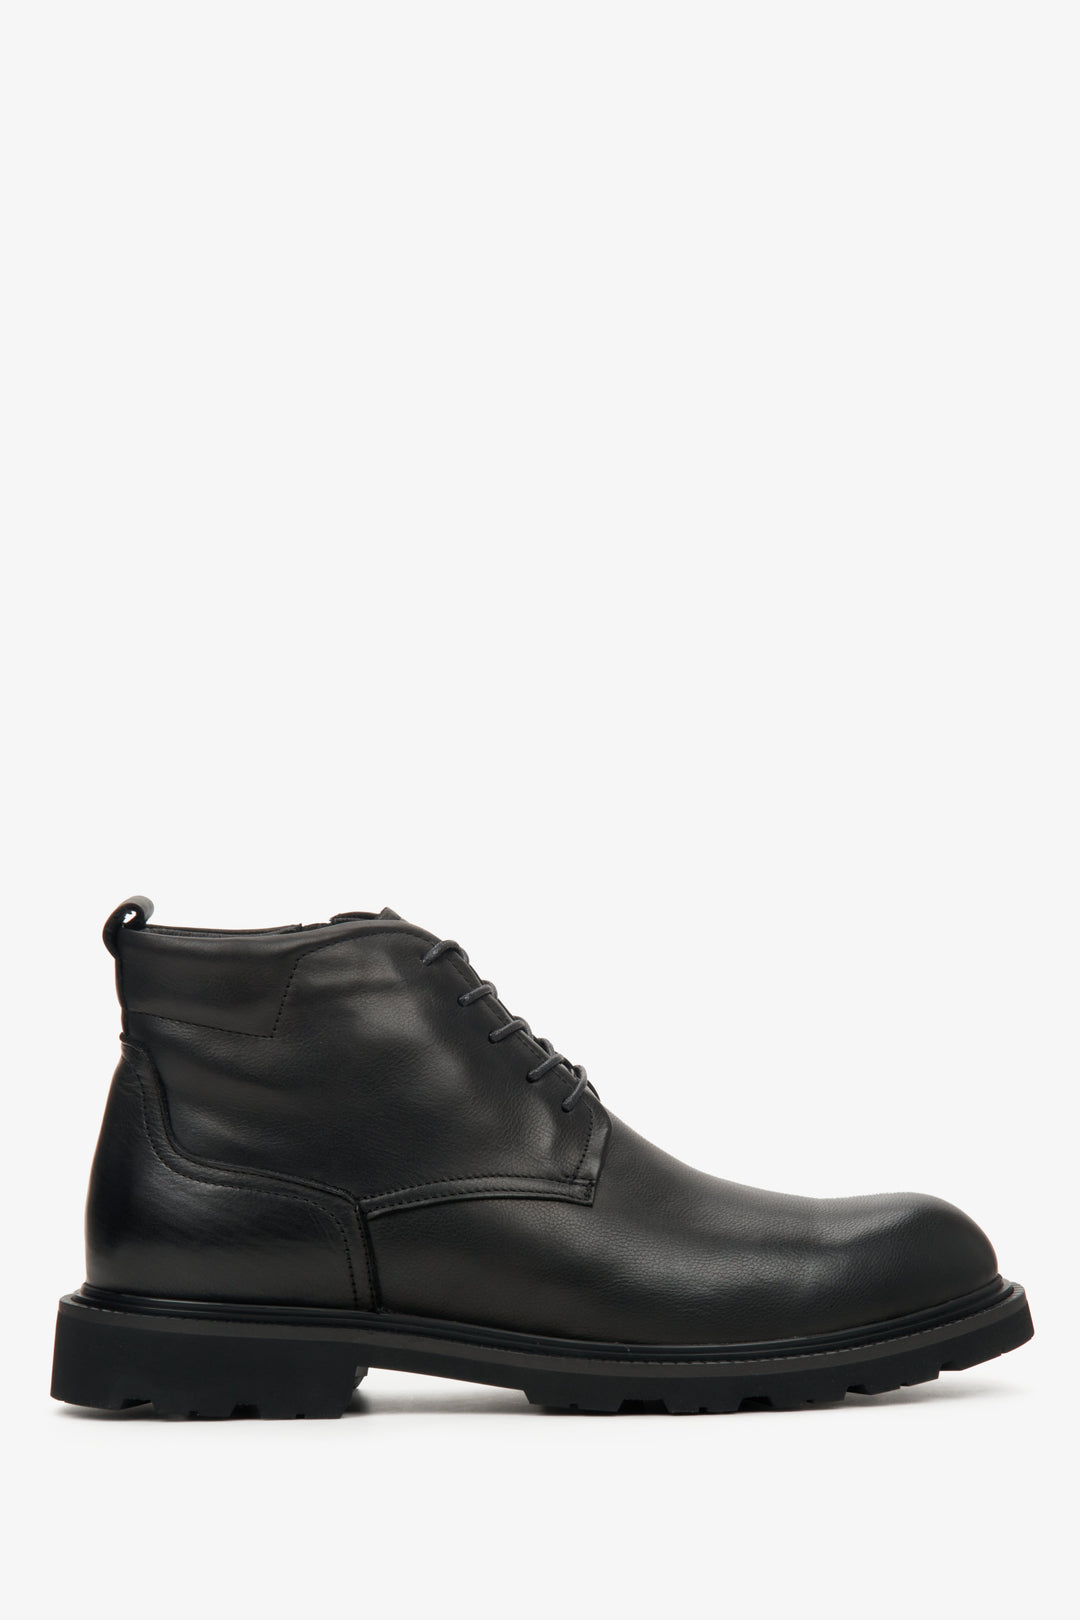 Men's Black Lace-up Ankle Boots made of Genuine Leather for Winter Estro ER00112195.